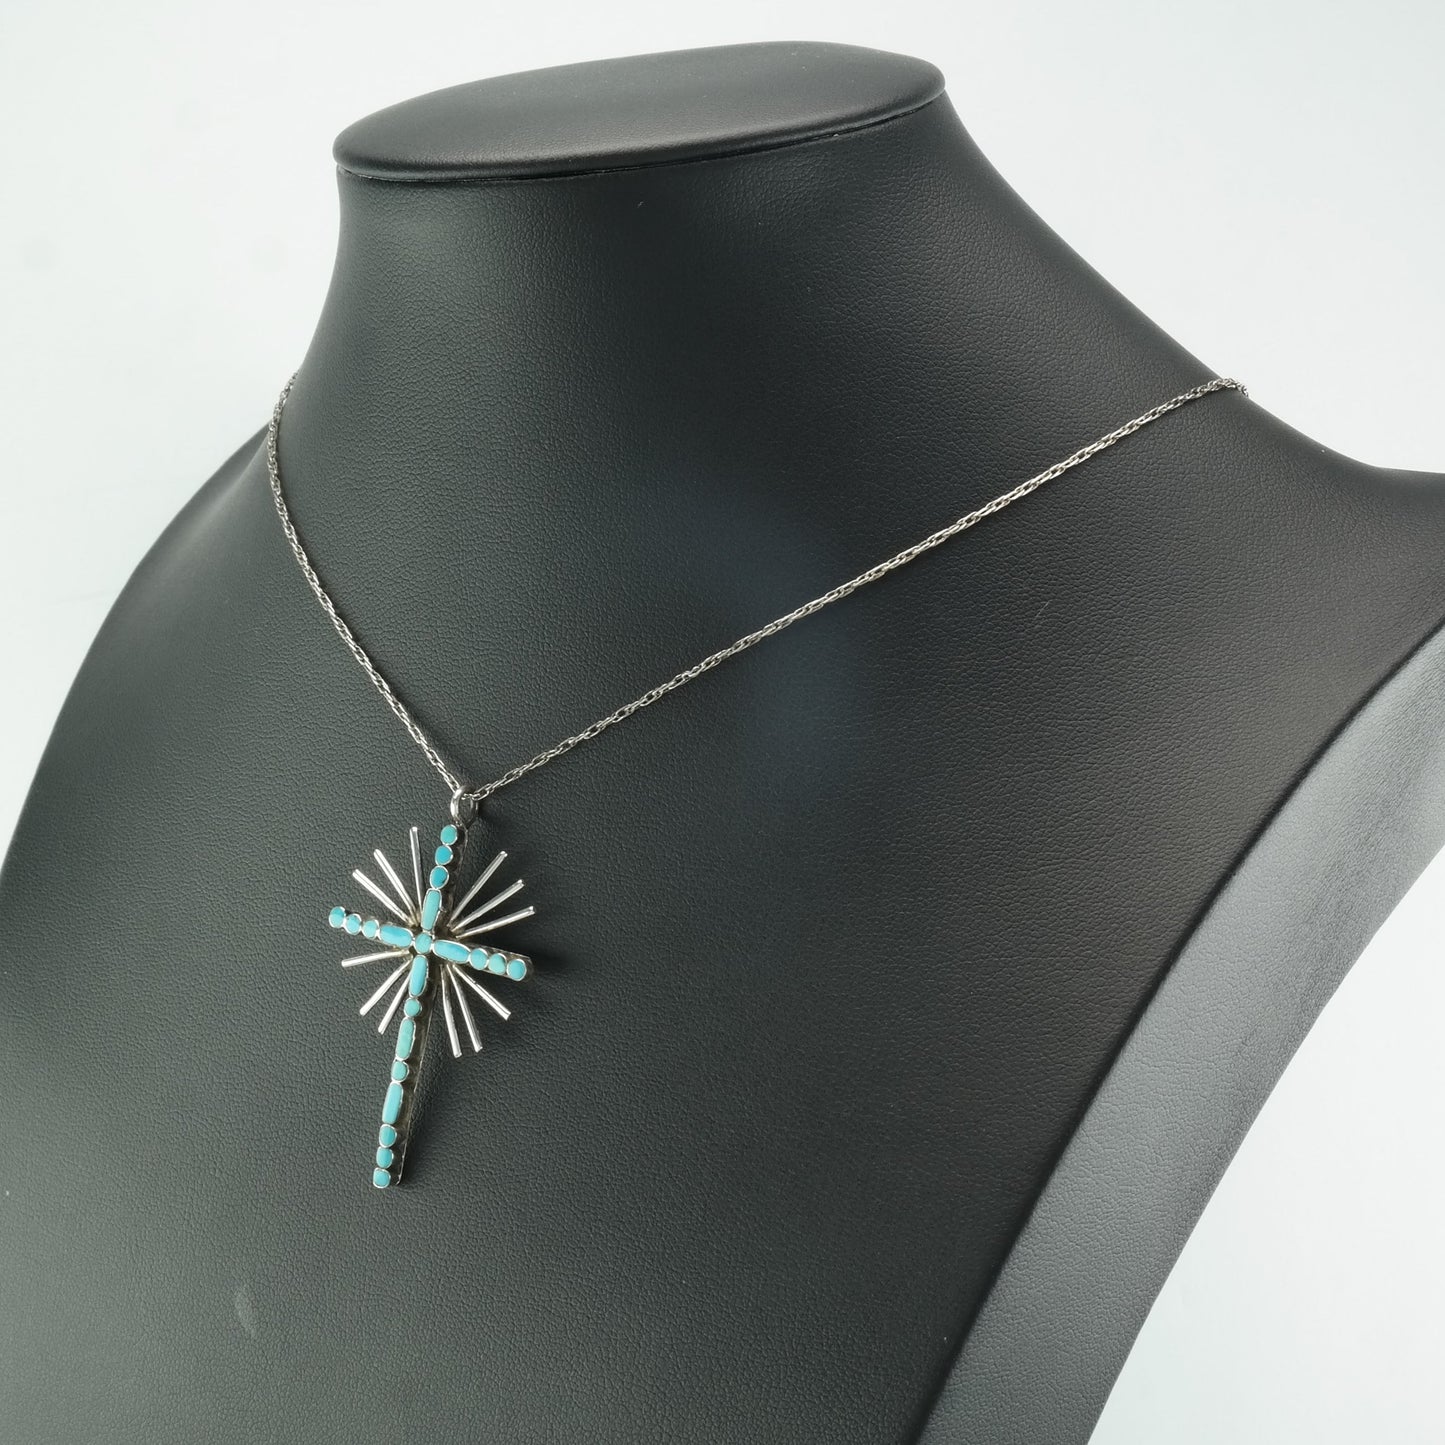 Vintage Southwest Sterling Silver Dishta Style Turquoise Cross Inlay Necklace